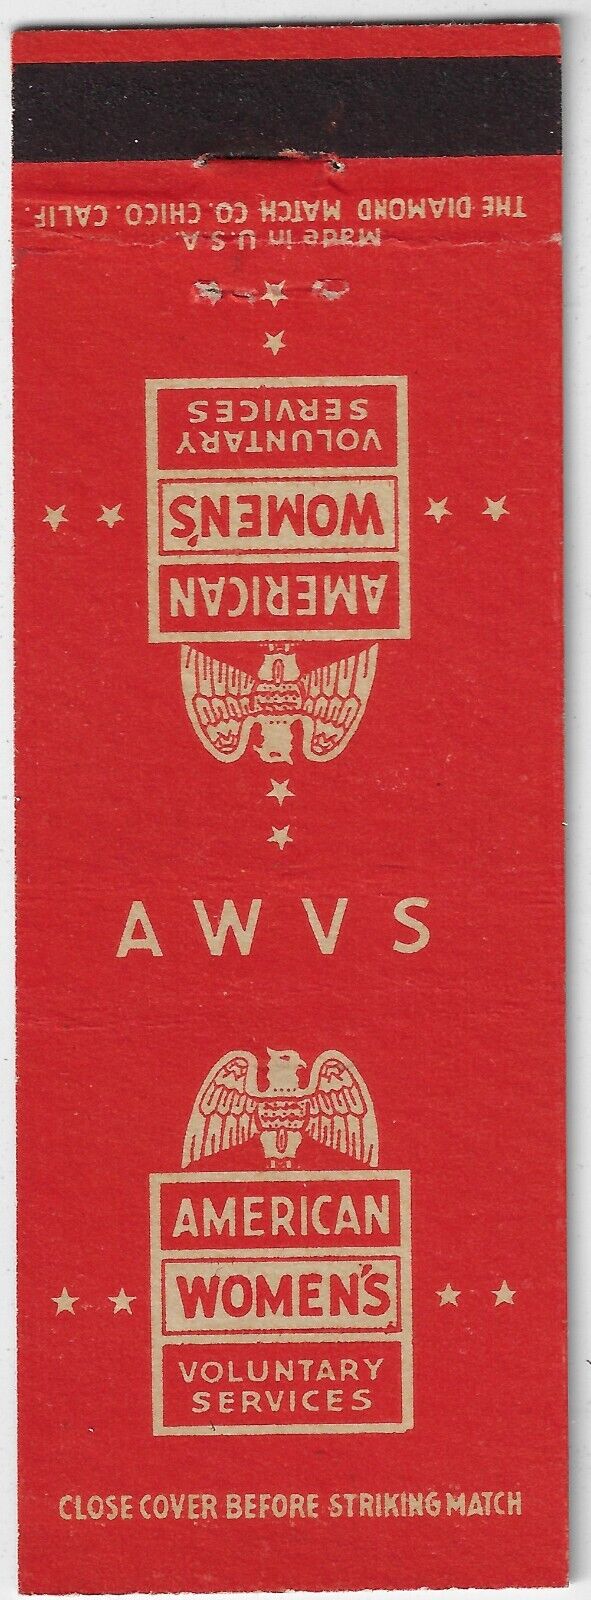 AWVS American Women's Voluntary Services FS Empty Matchbook Cover